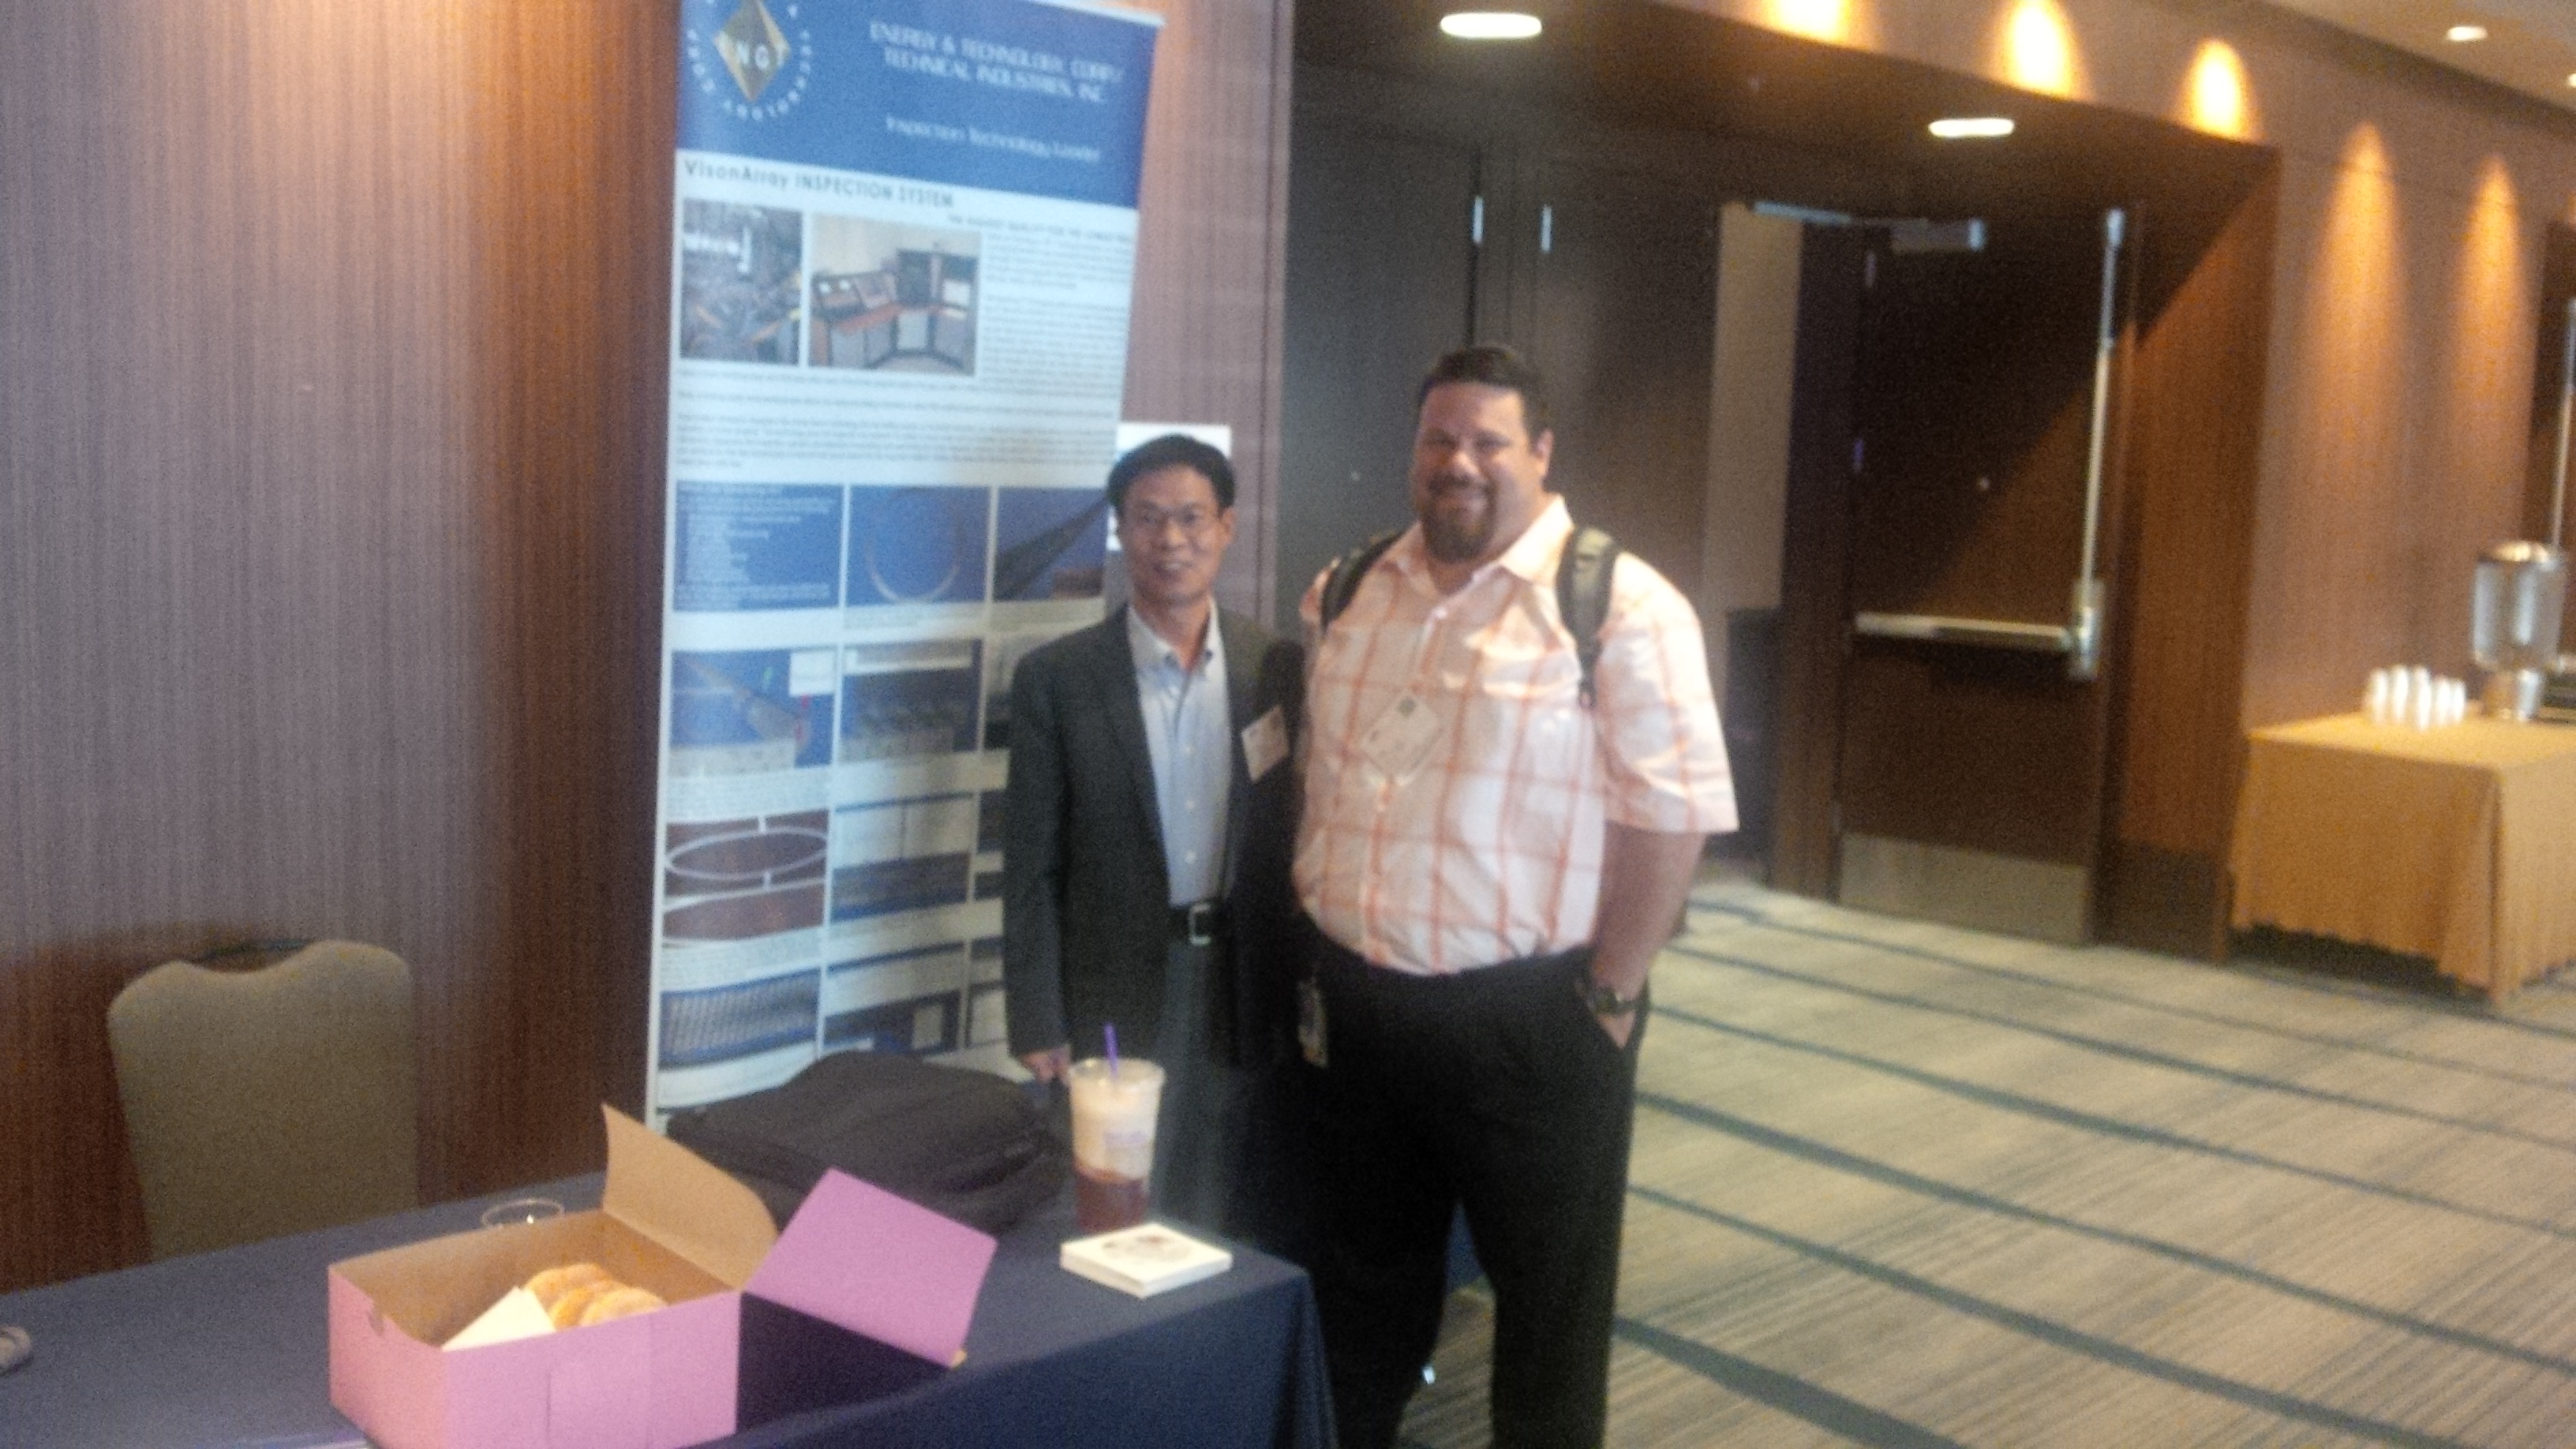 API San Francisco Conference 06-23-2015. Dr. Frank Wang presenting Technical Industries and simulating Burst & Collapse Equation